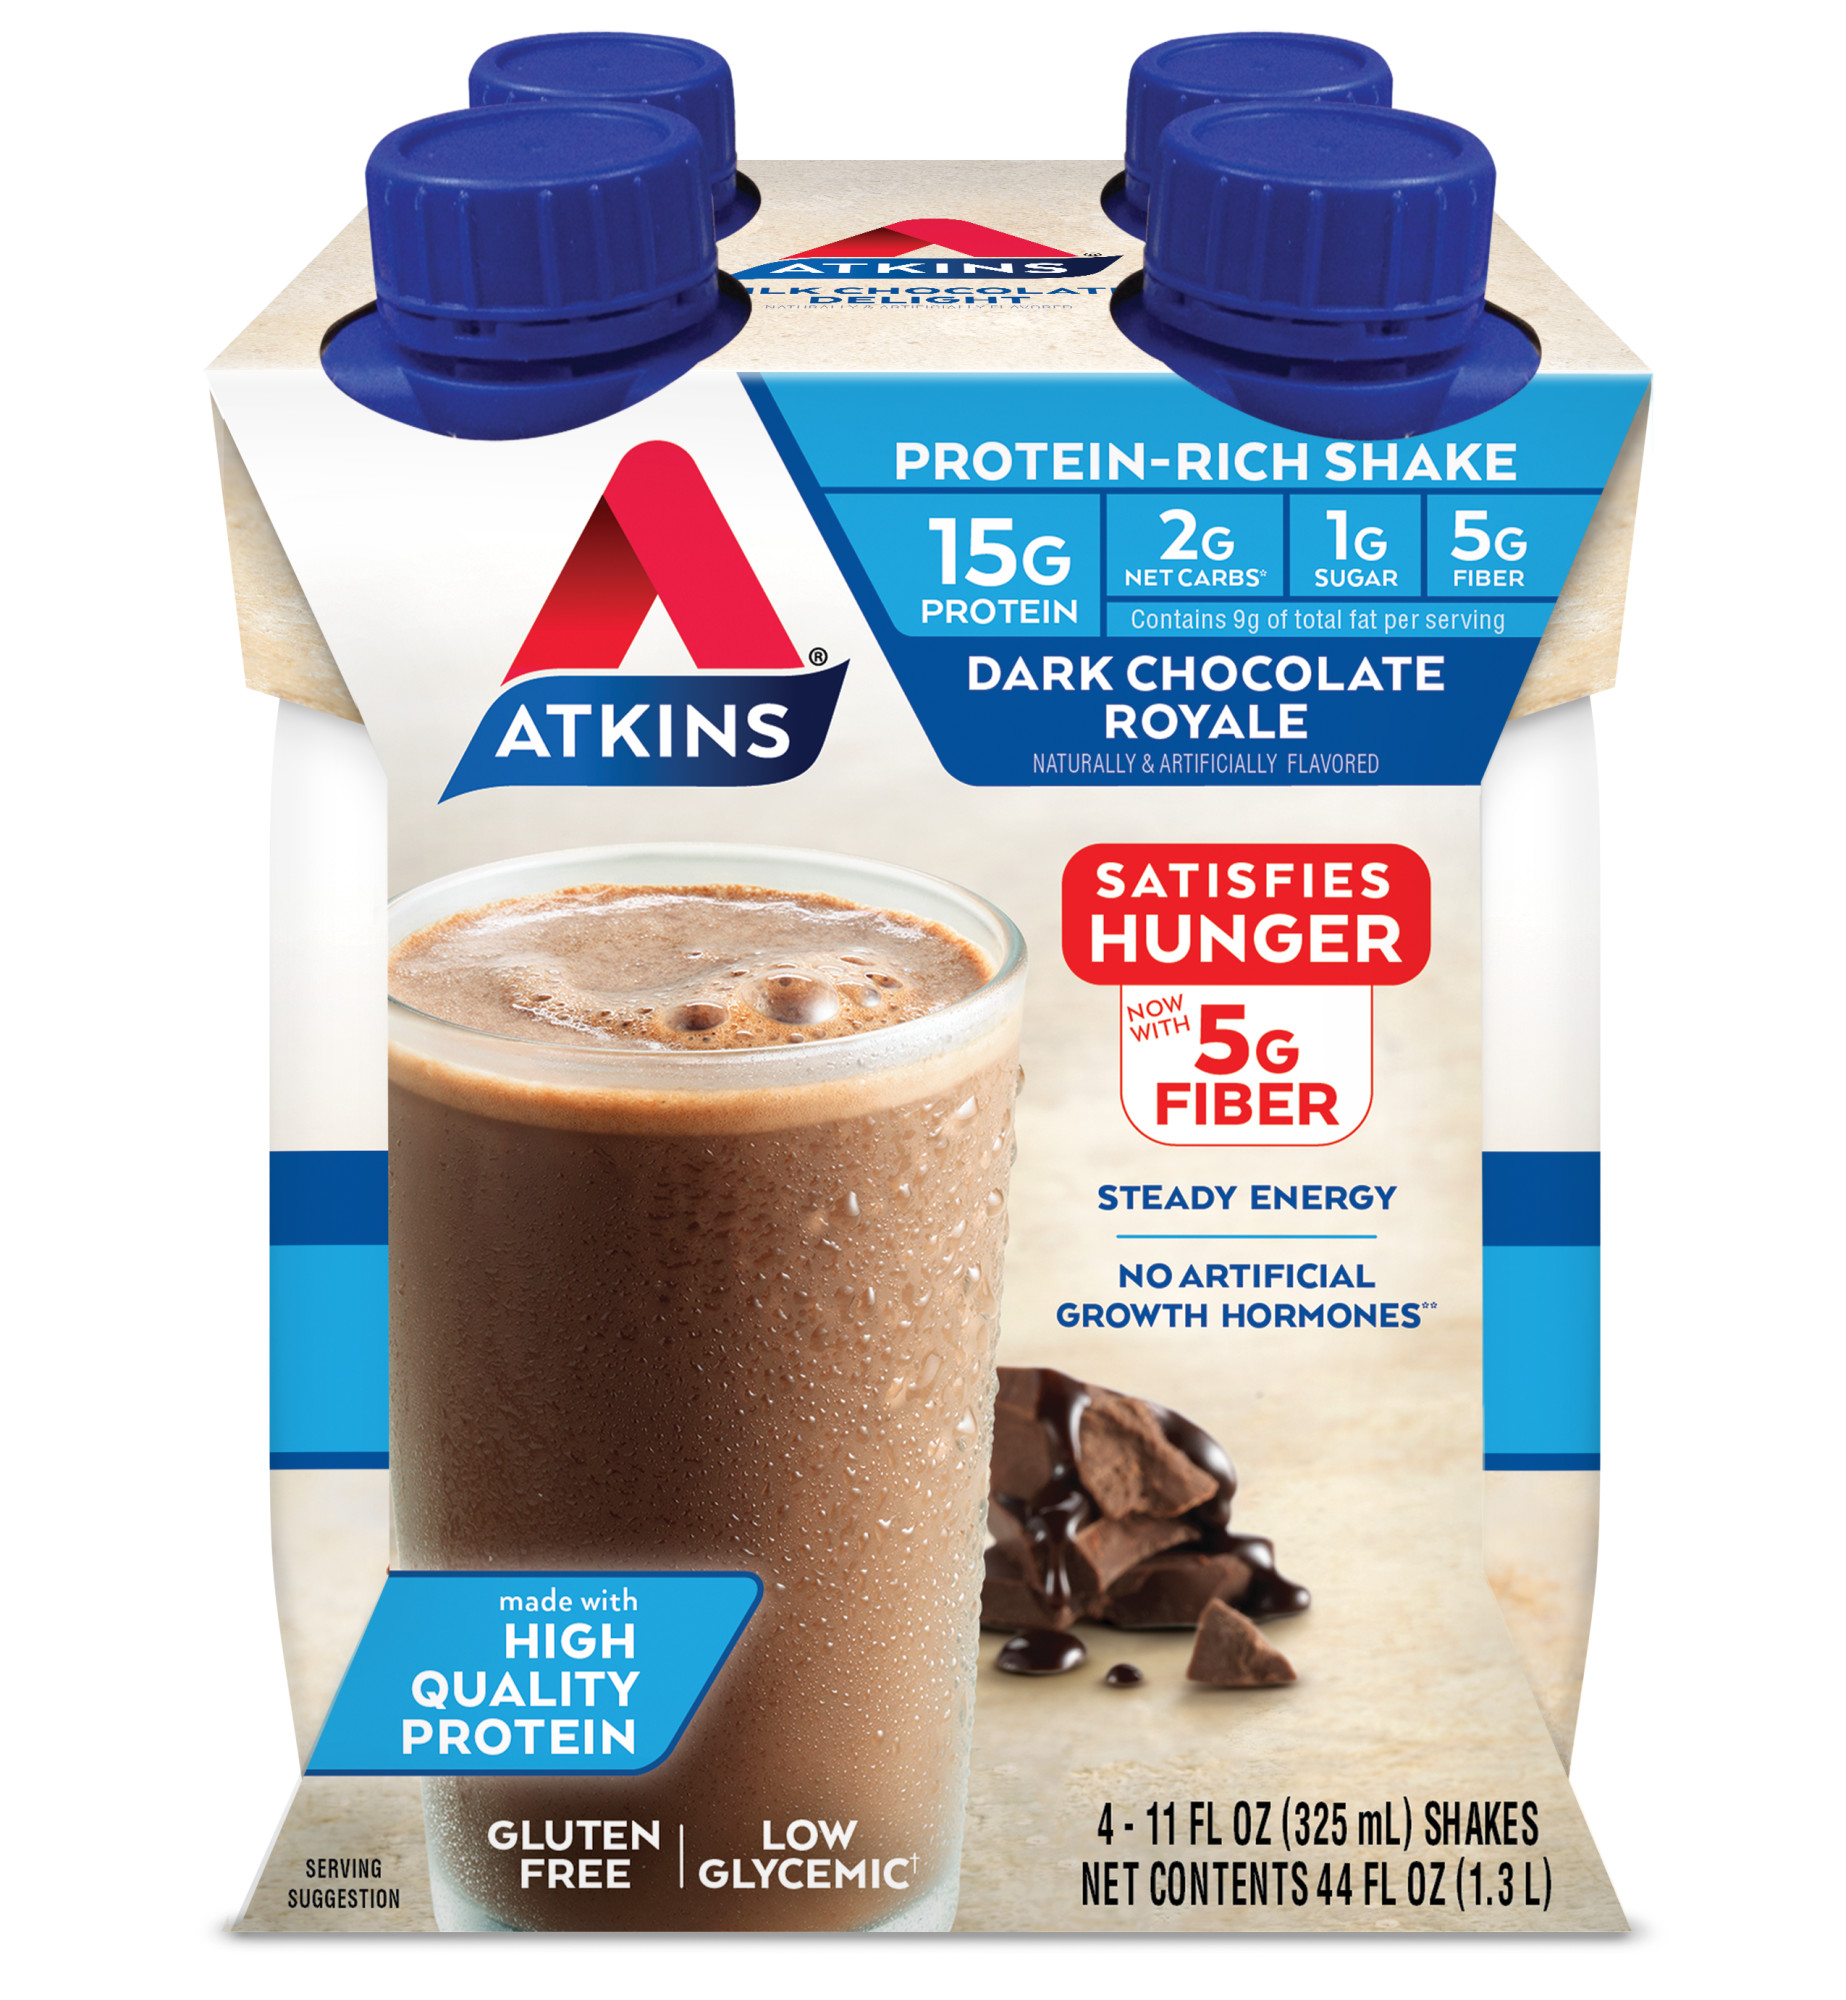 (3 pack) Atkins Dark Chocolate Royale Protein Shake, High Protein, Low Carb, Keto Friendly, Gluten Free, 11fl oz, 4 Ct - image 1 of 9